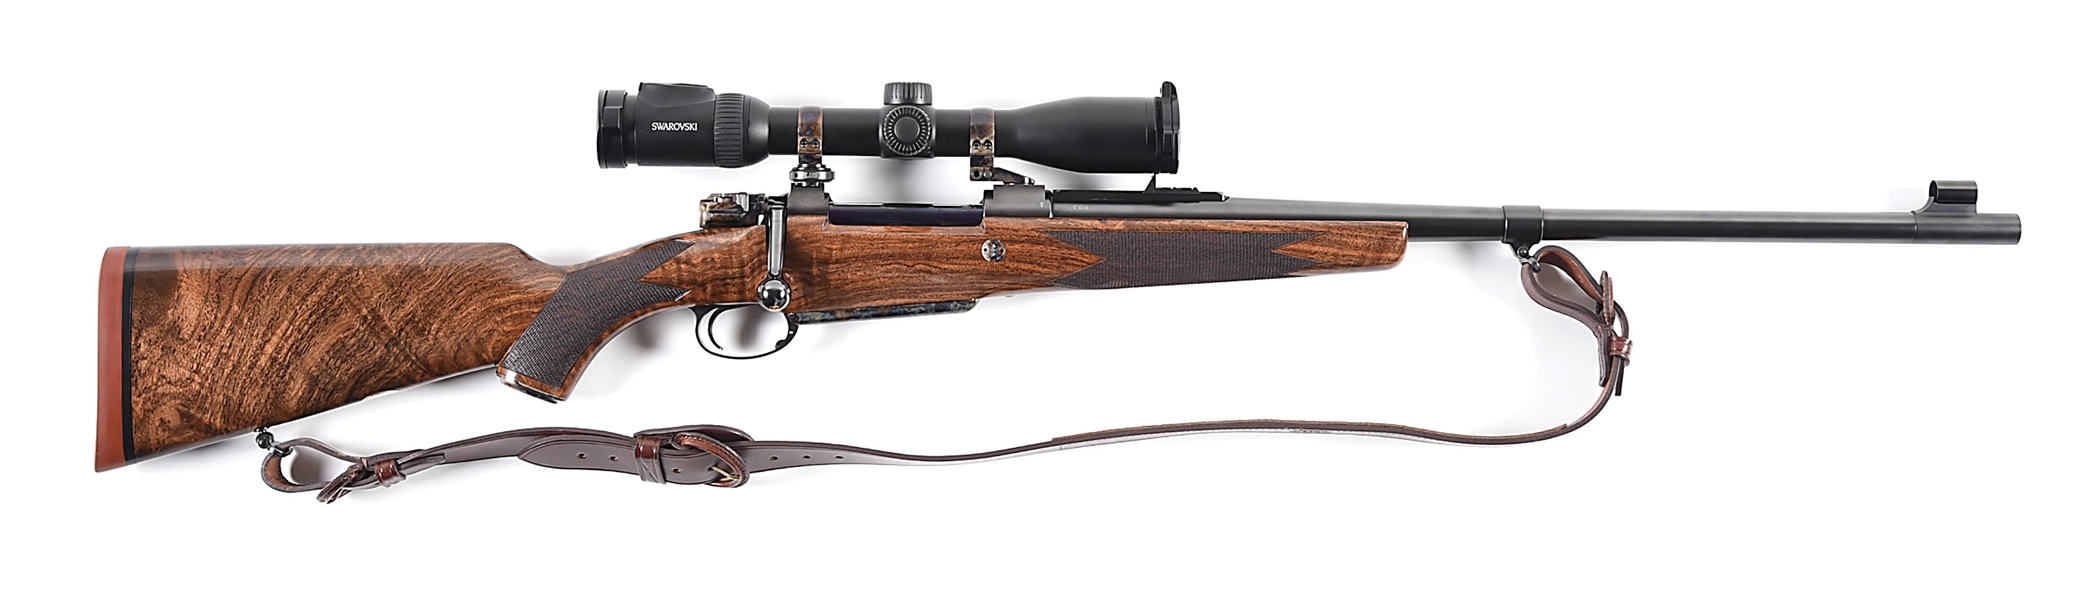 (M) JOHN RIGBY AND MAUSER COLLABORATION "BIG GAME" RIFLE IN .375 H&H MAGNUM WITH SWAROVSKI GLASS, CASE.